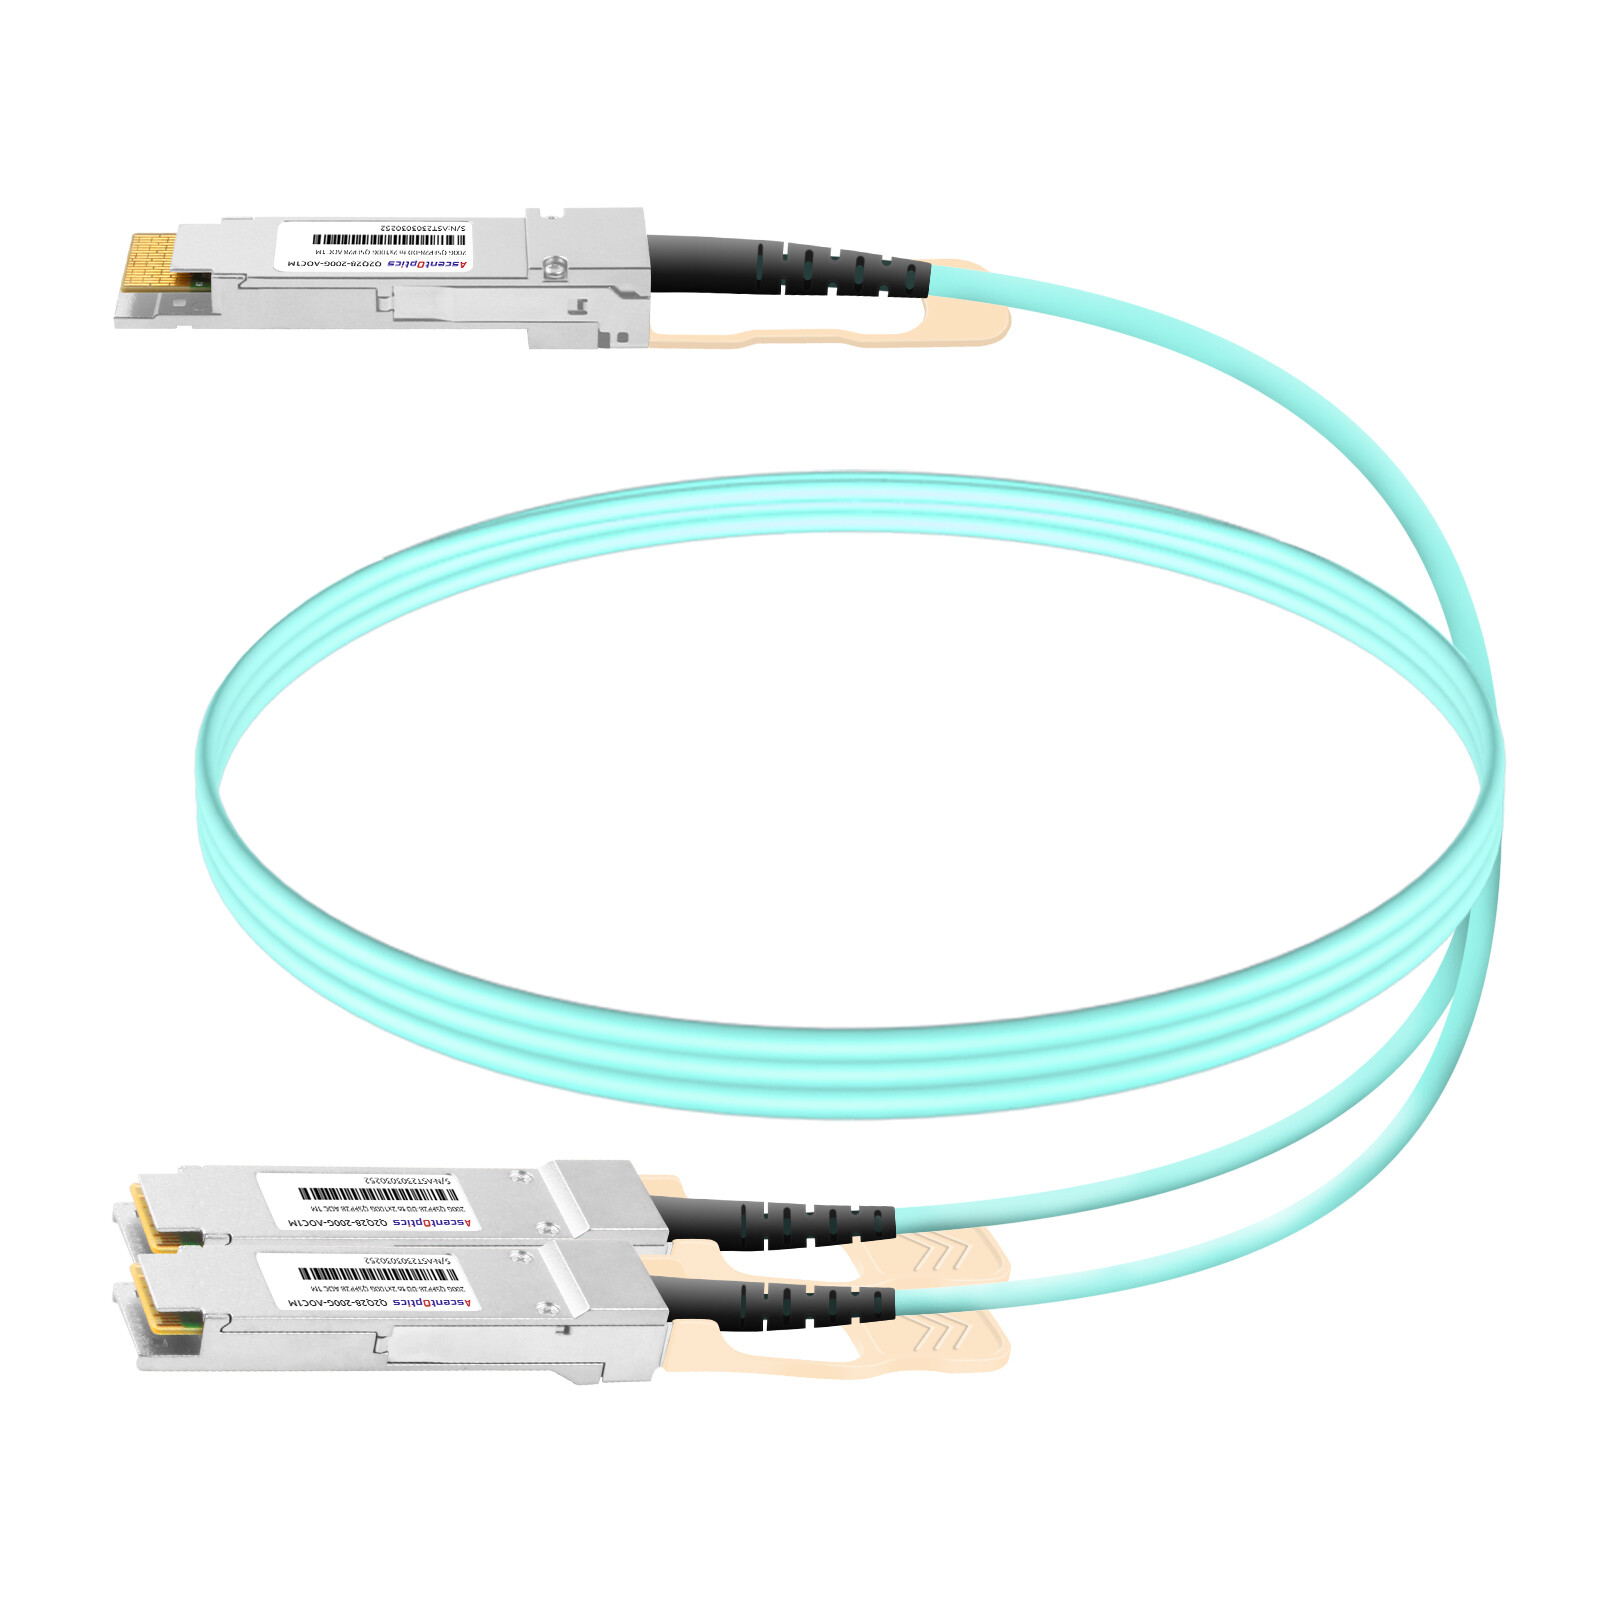 200G QSFP28-DD to 2x 100G QSFP28 Breakout AOC Cable,1 Meter